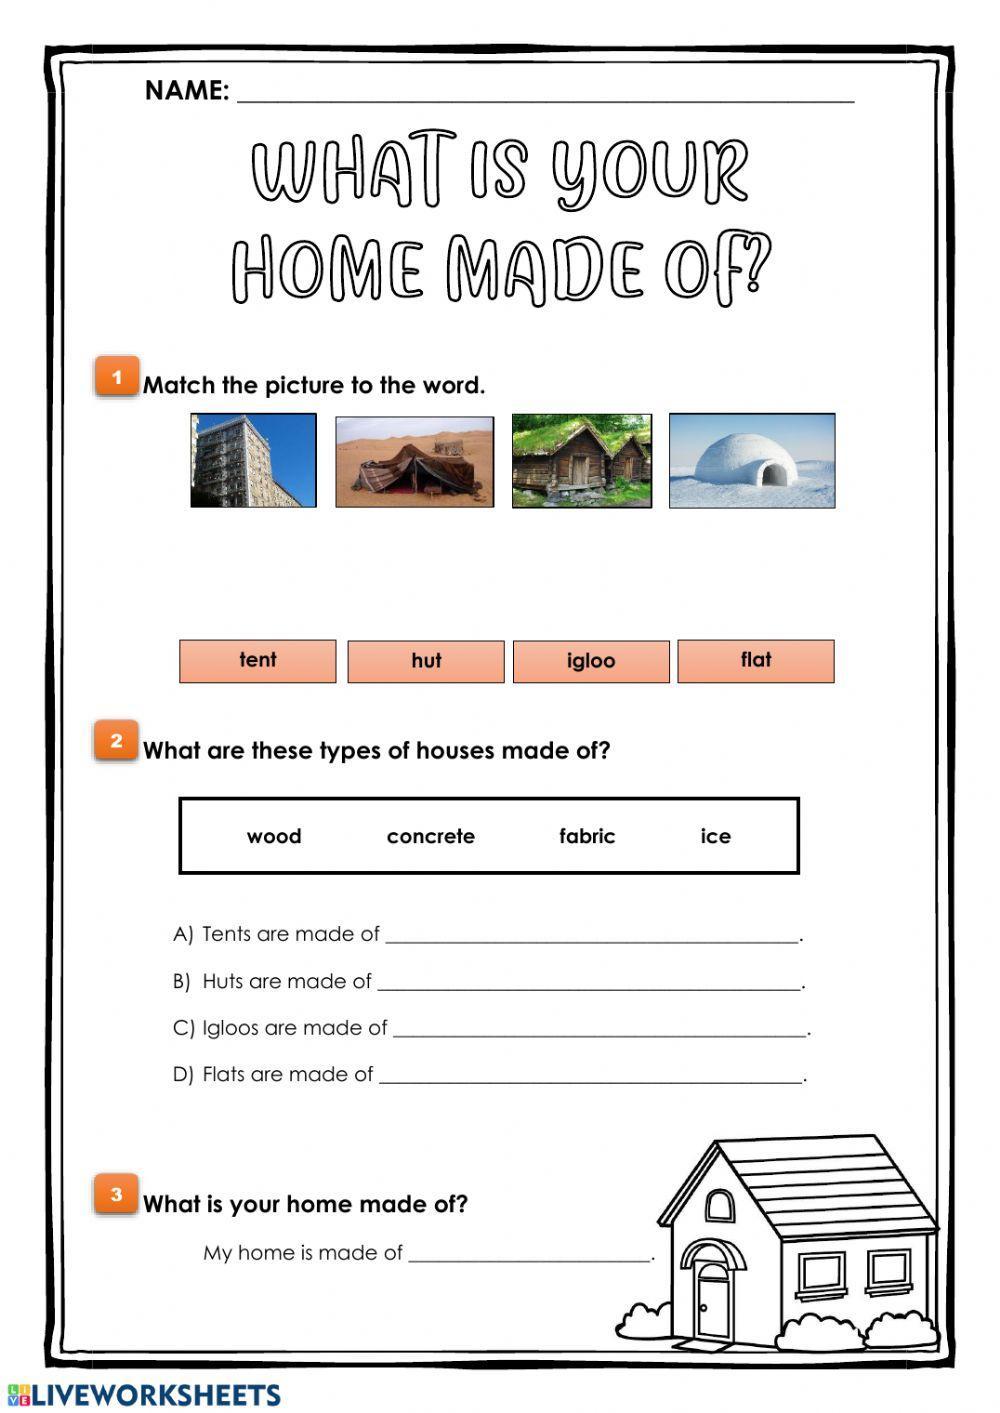 What is your home made of?